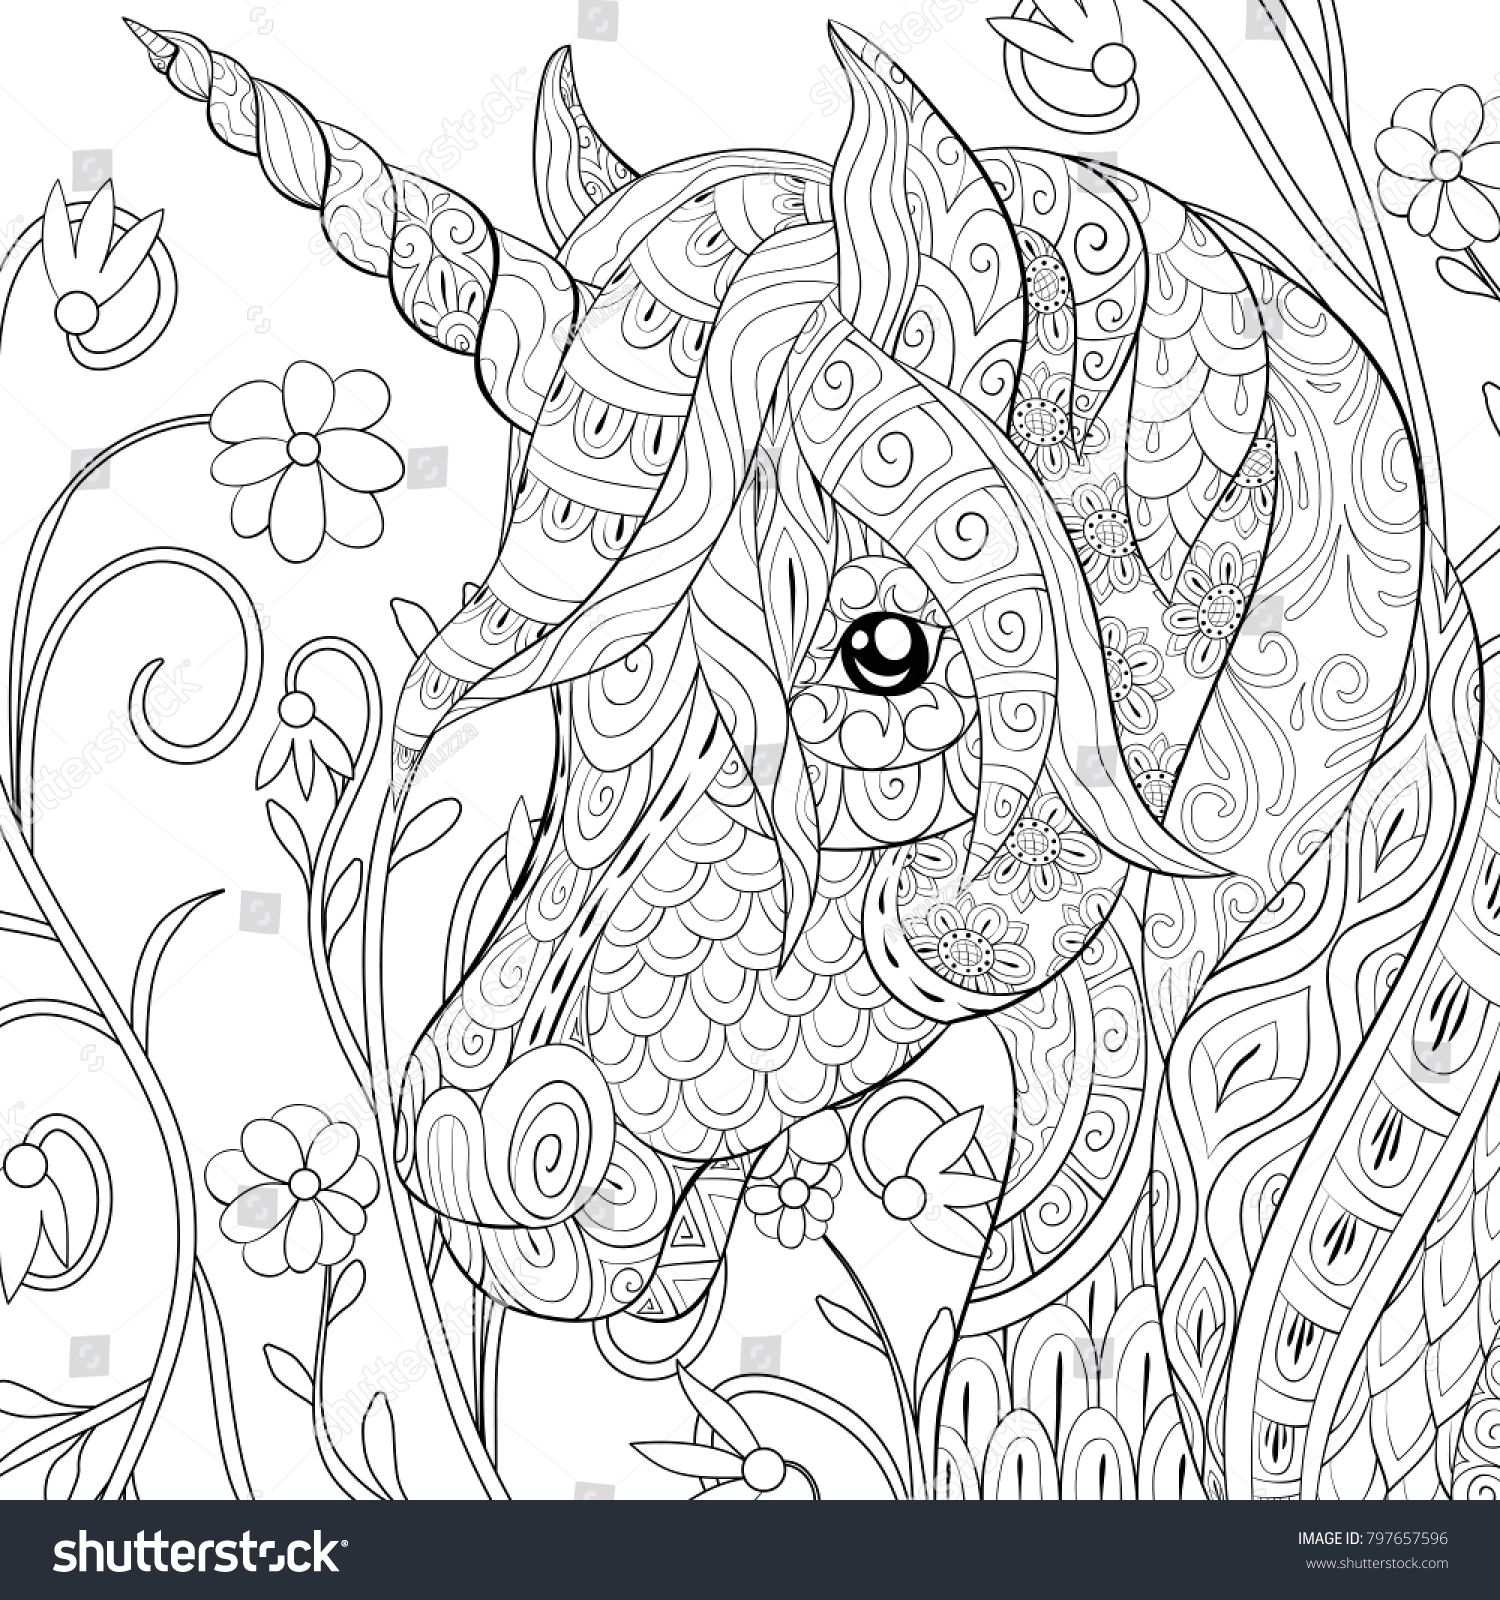 Adult Coloring Page Book A Cute Unicorn On The Floral Background